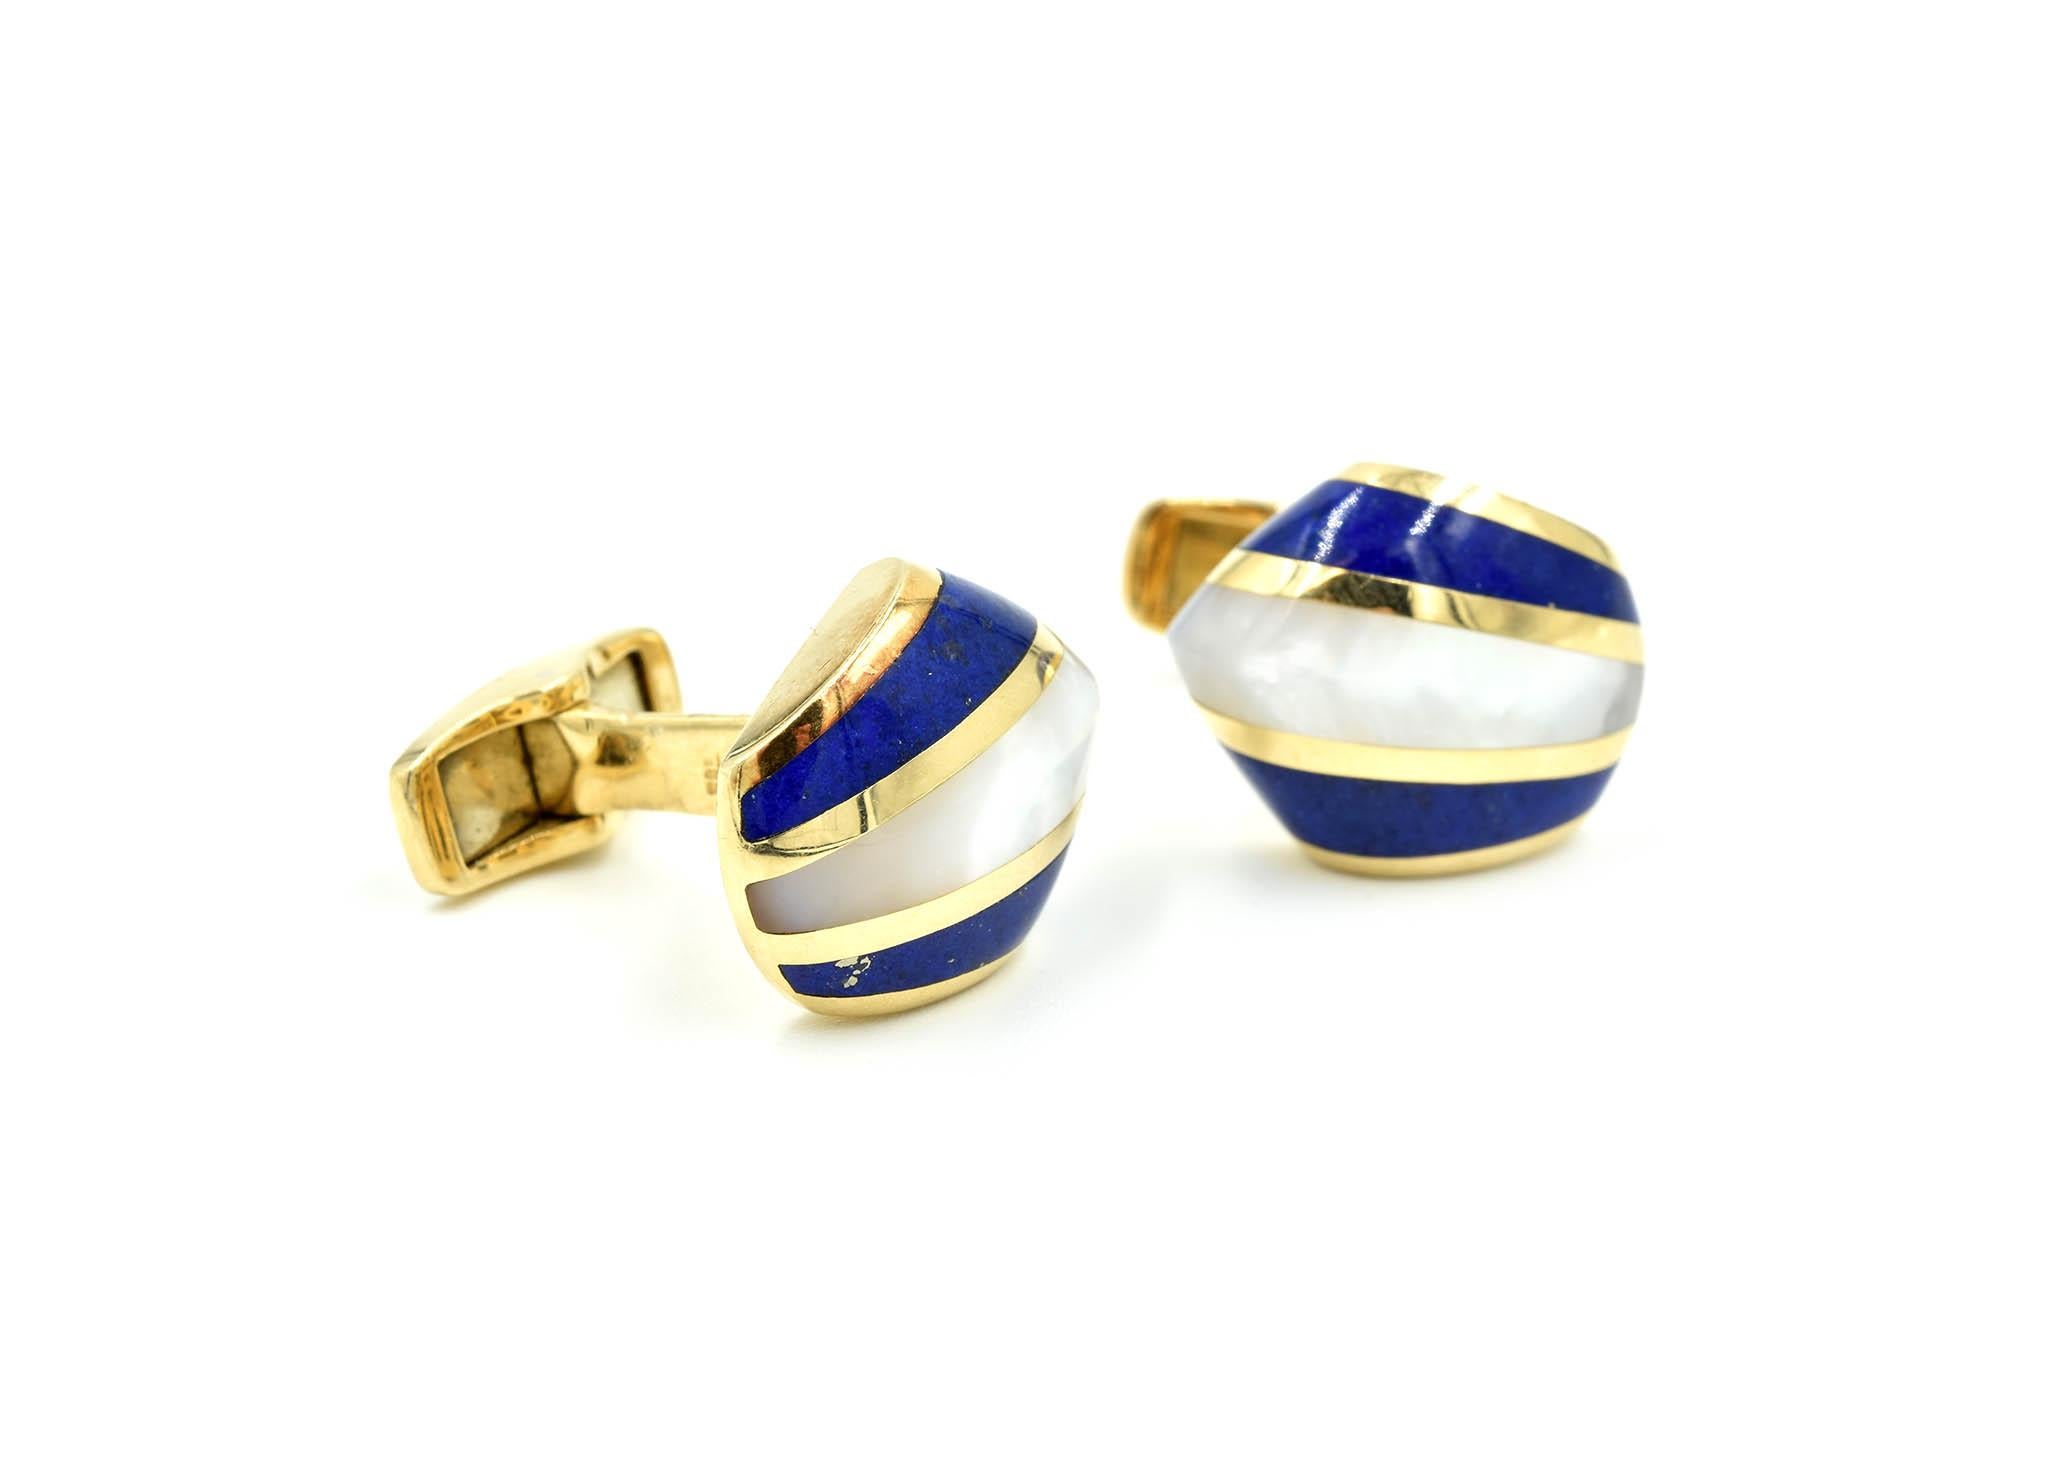 This pair of button style cufflinks is styled in 14K yellow gold. The cufflinks feature a center inlay of white mother-of-pearl flanked by stunning blue lapis lazuli. Each section is framed by high-polished yellow gold. The cufflinks measure 19x15mm